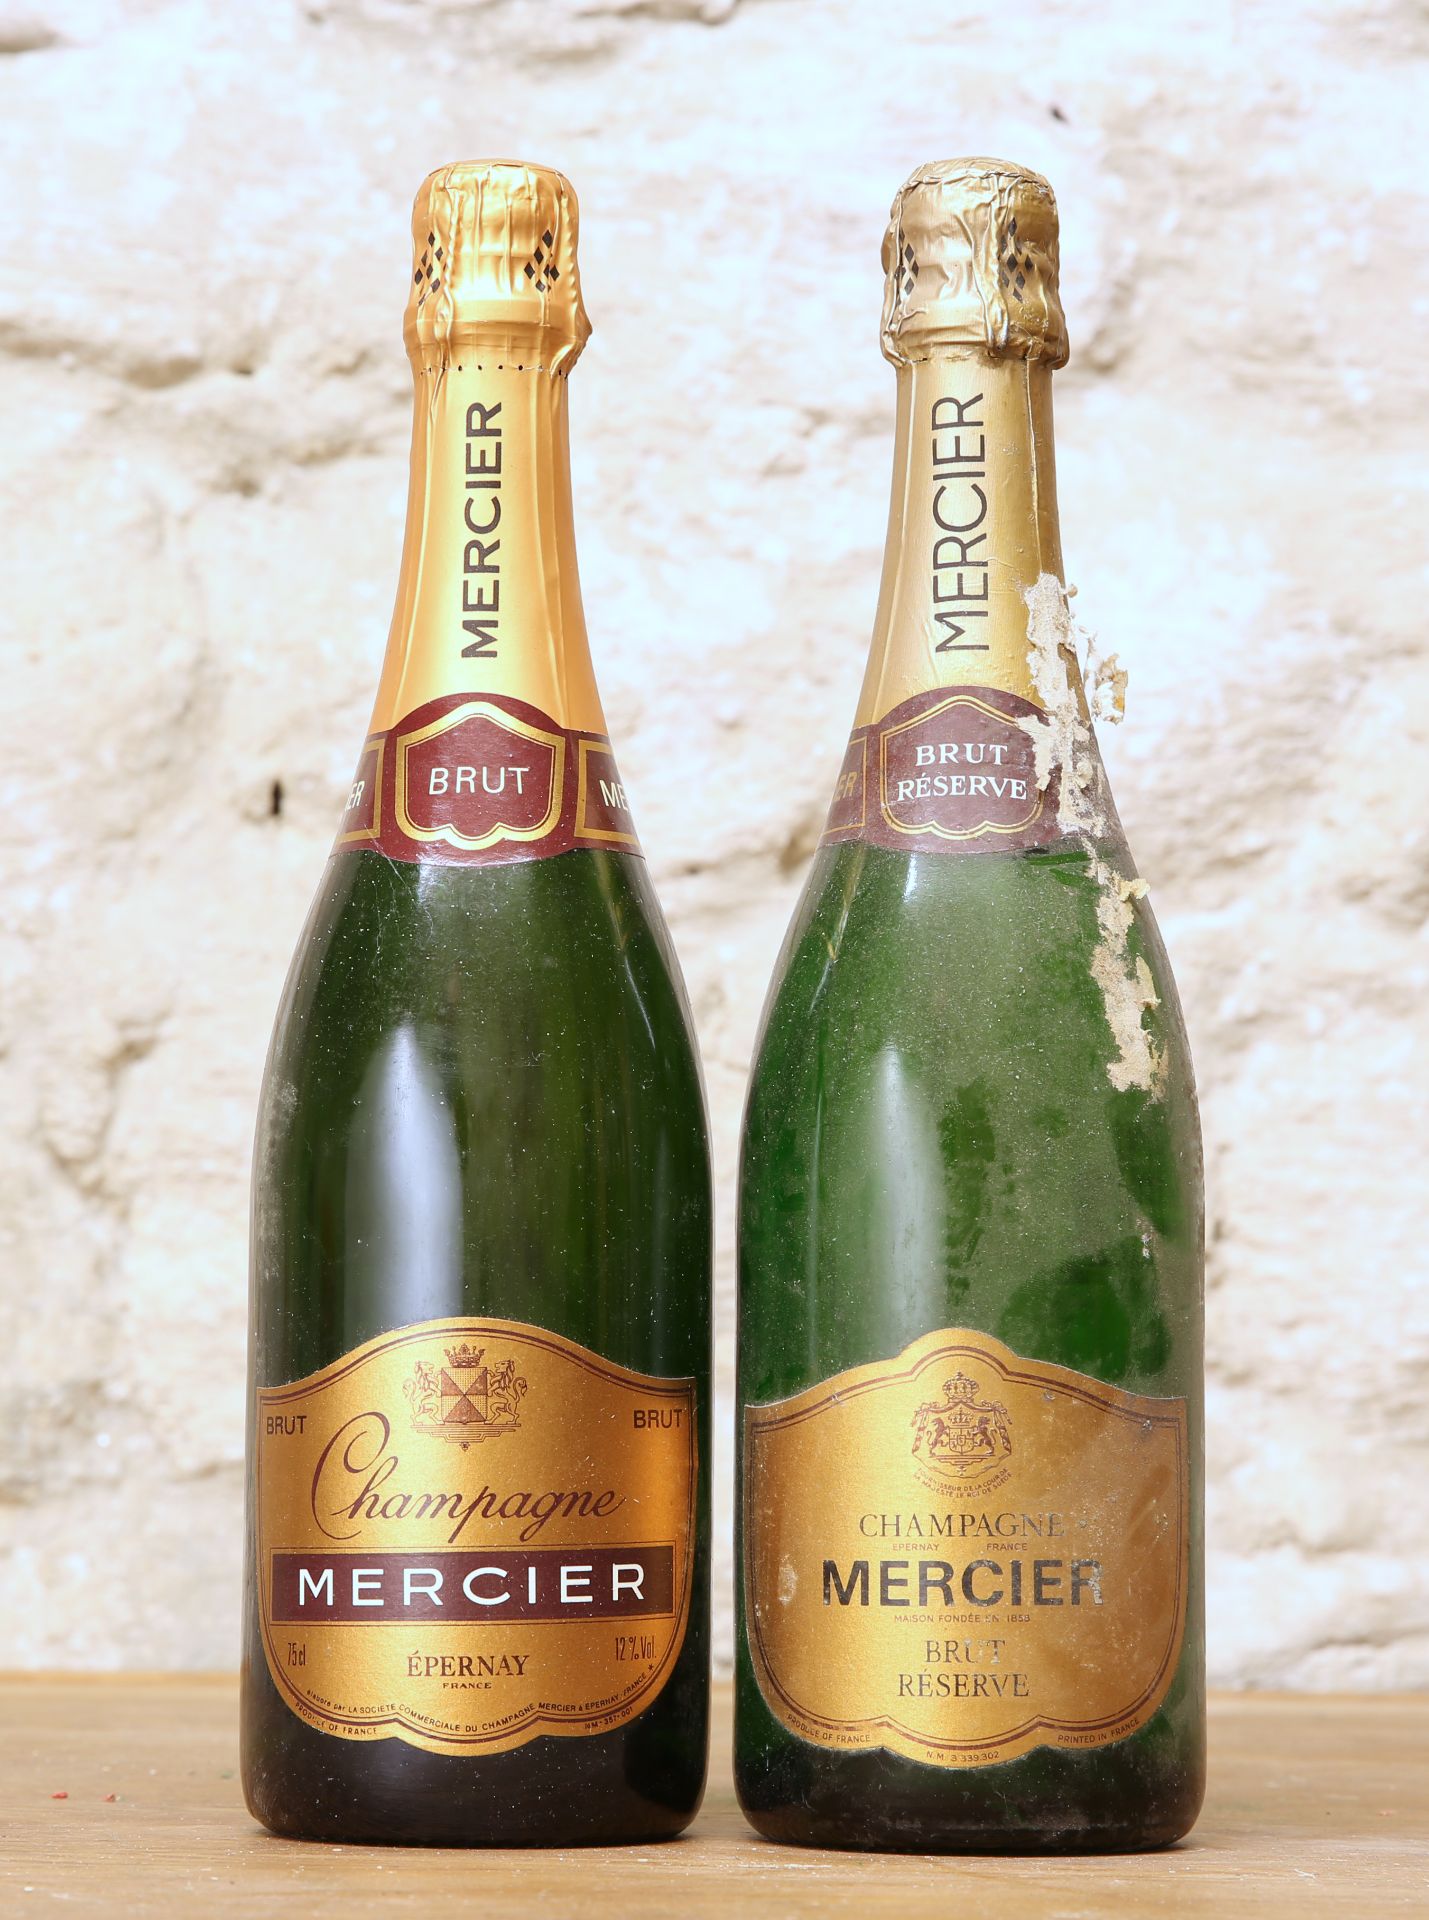 2 BOTTLES CHAMPAGNE MERCIER BRUT VN FROM 1970'S (ONE EARLY 1970'S AND ONE LATE 1970'S)